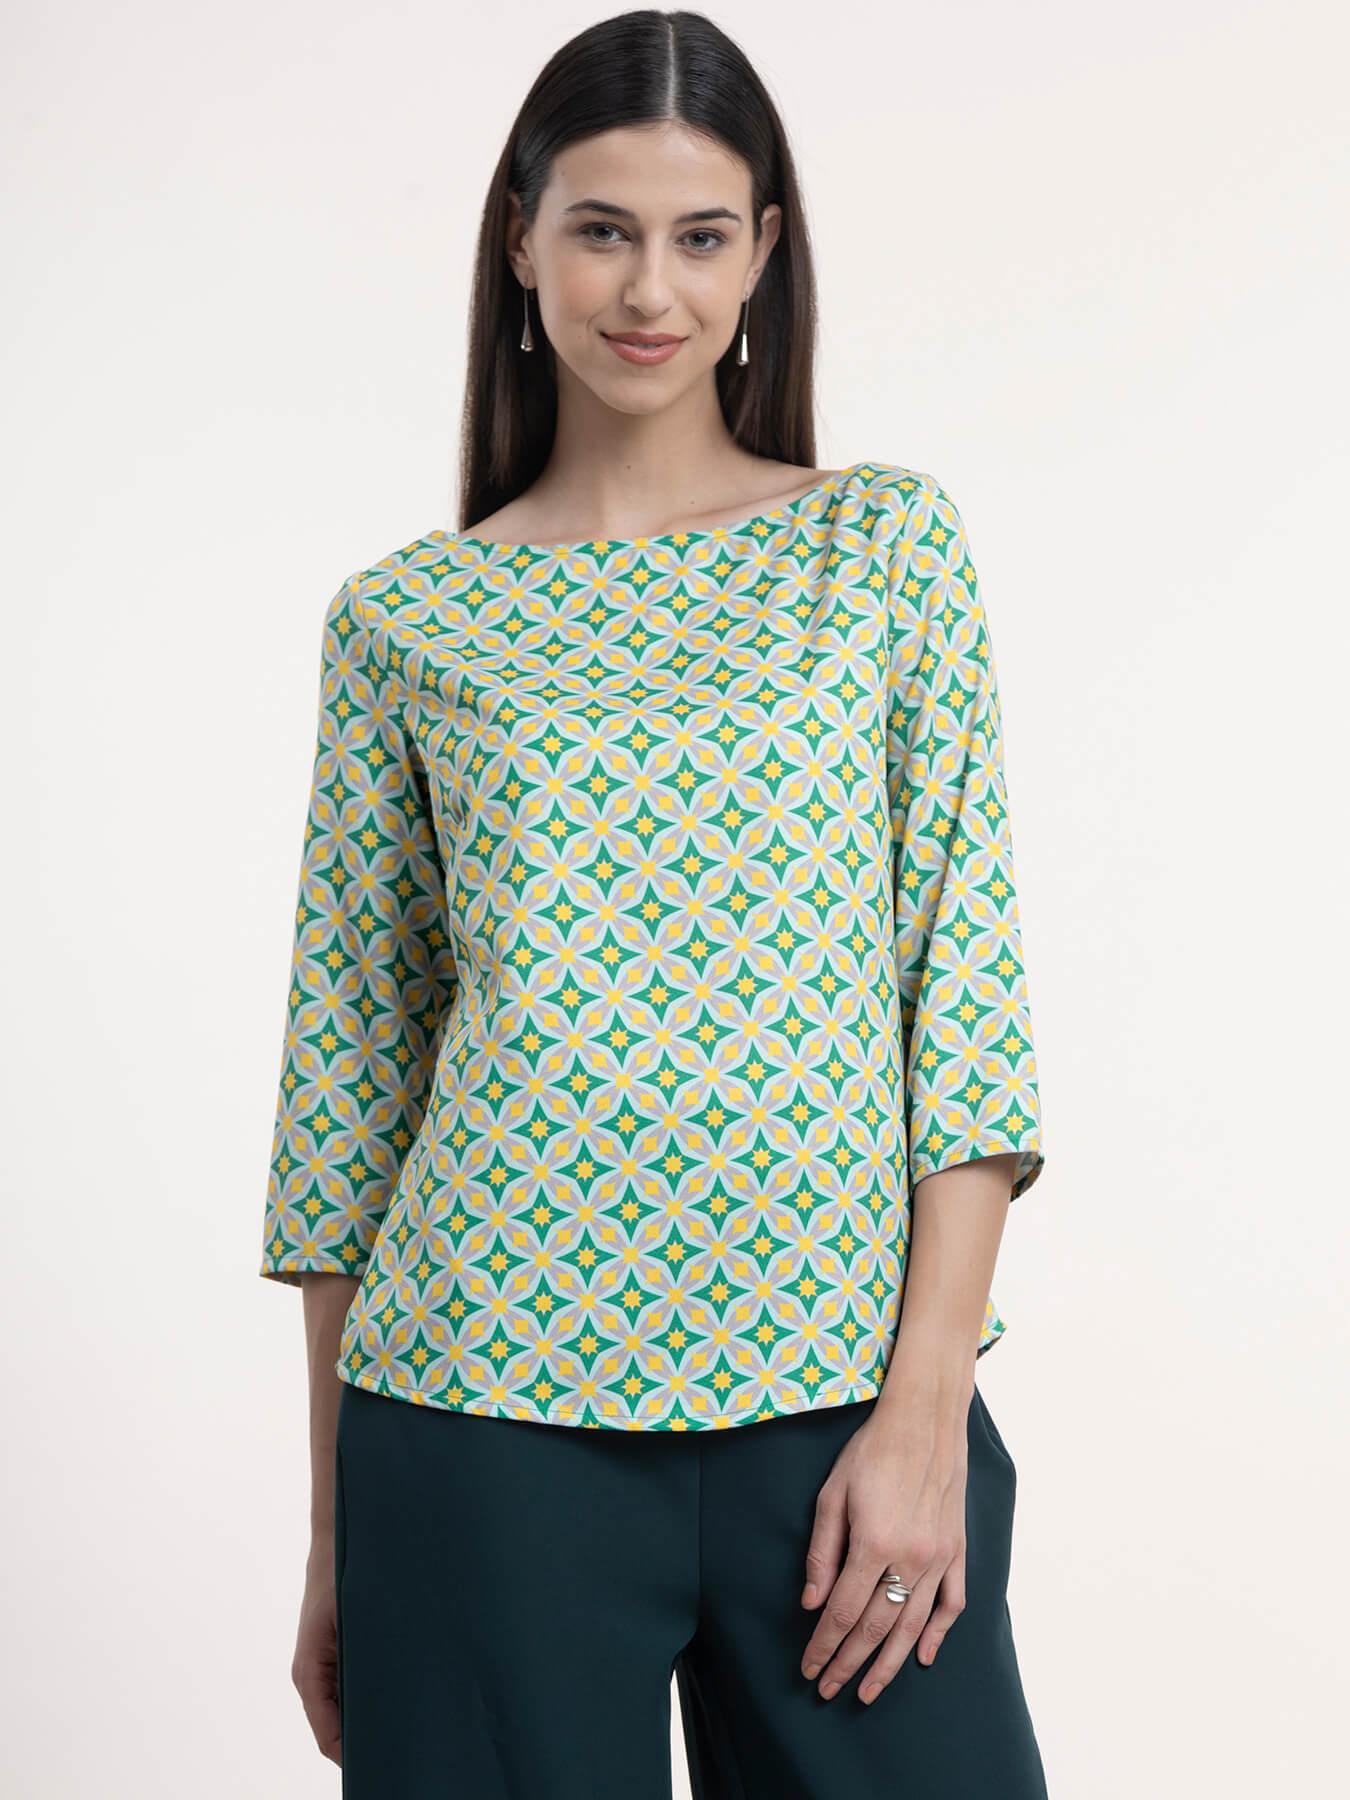 Boat Neck Top - Grey and Green| Formal Tops